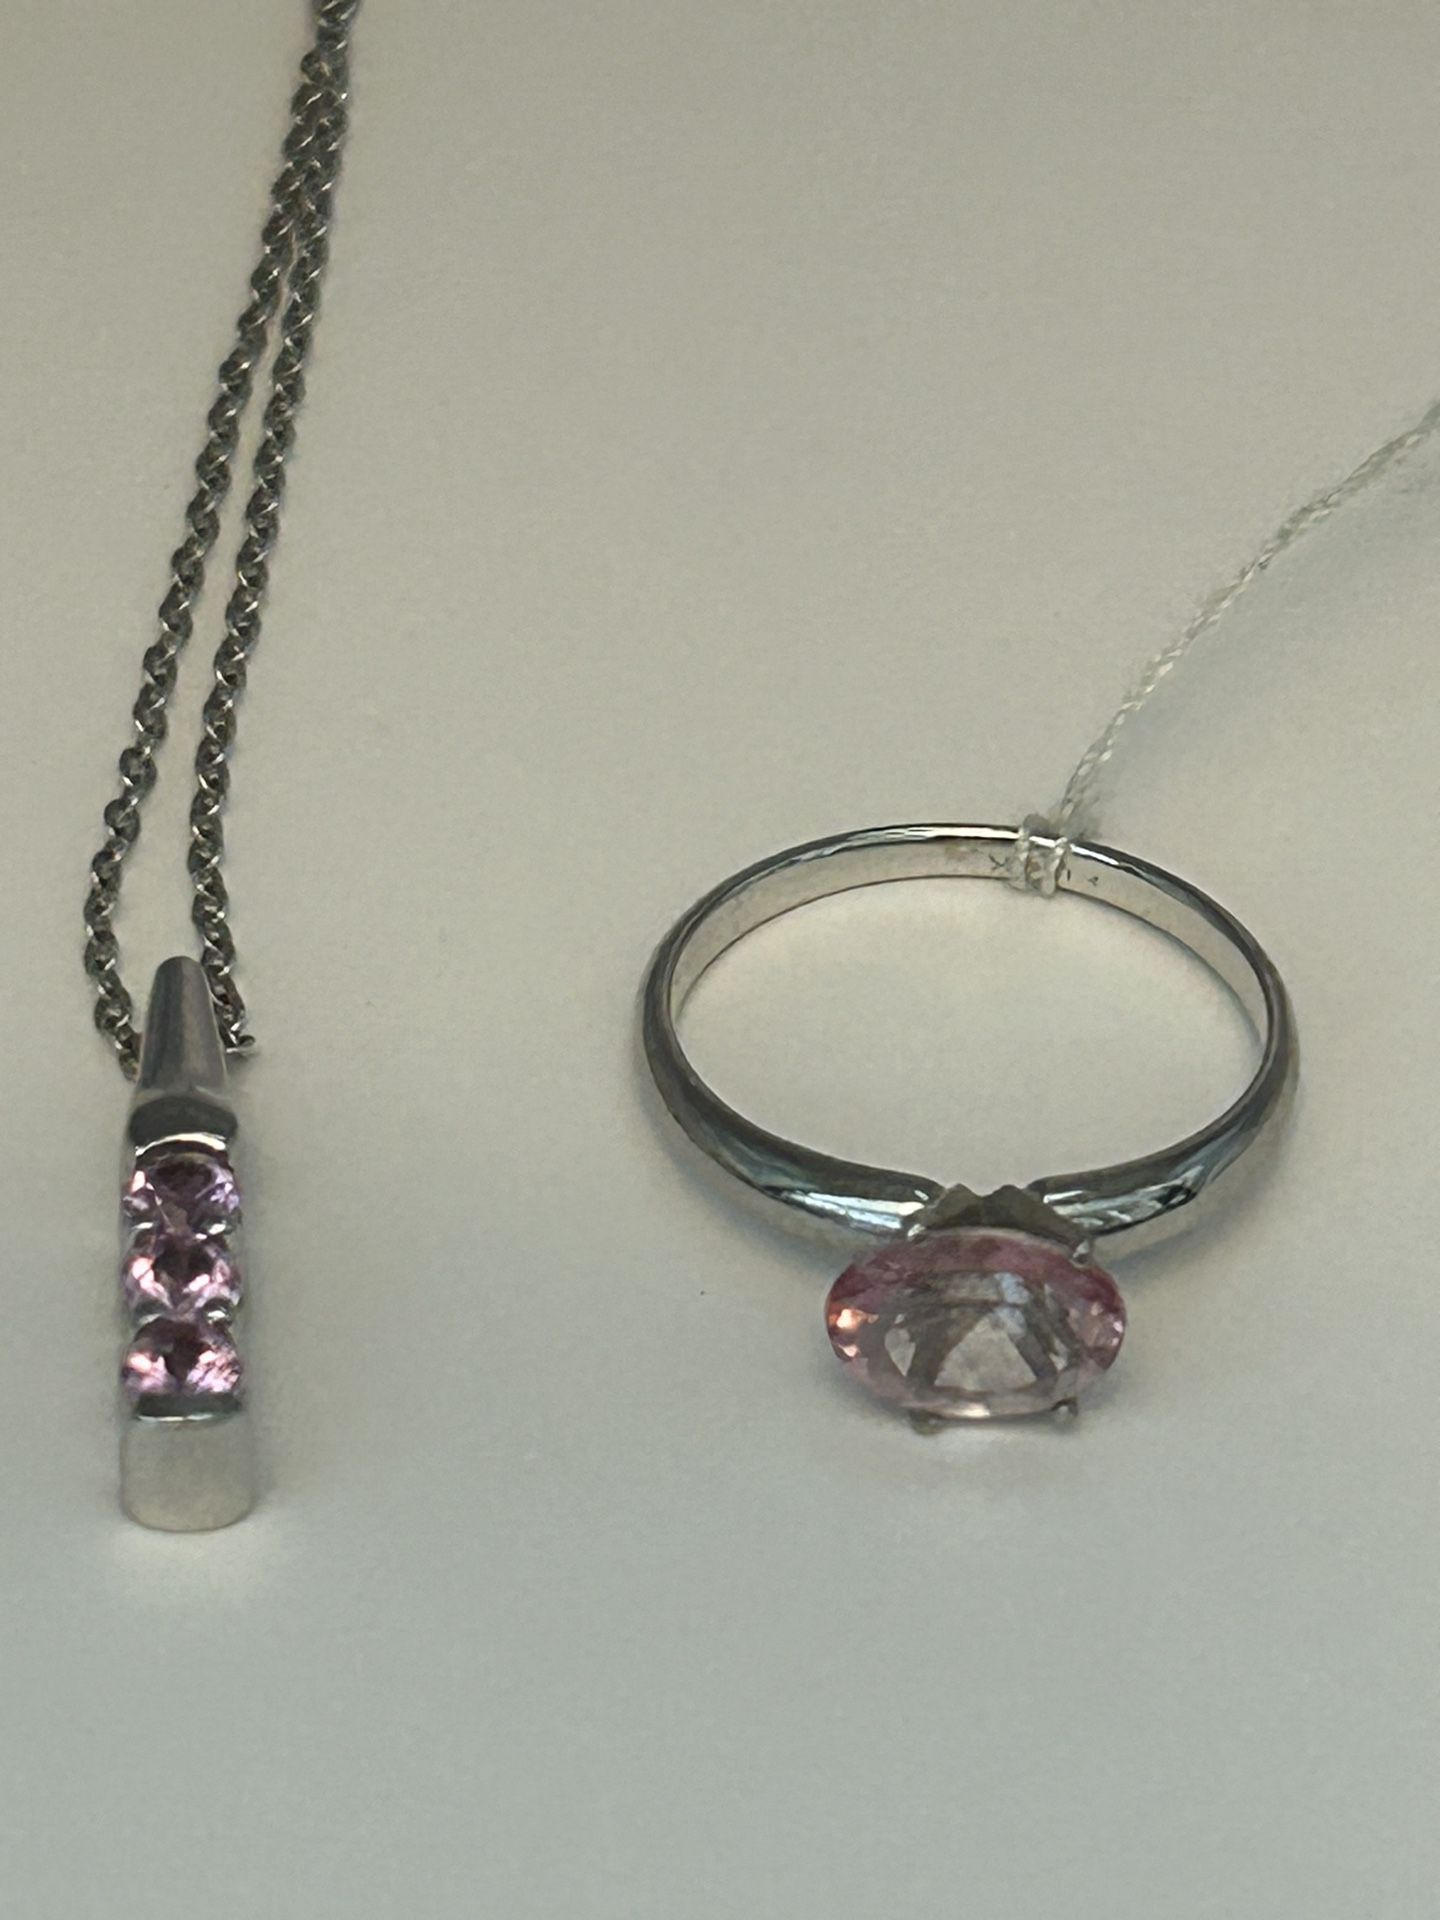 14K White Gold Genuine Pink Topaz Ring and Necklace  